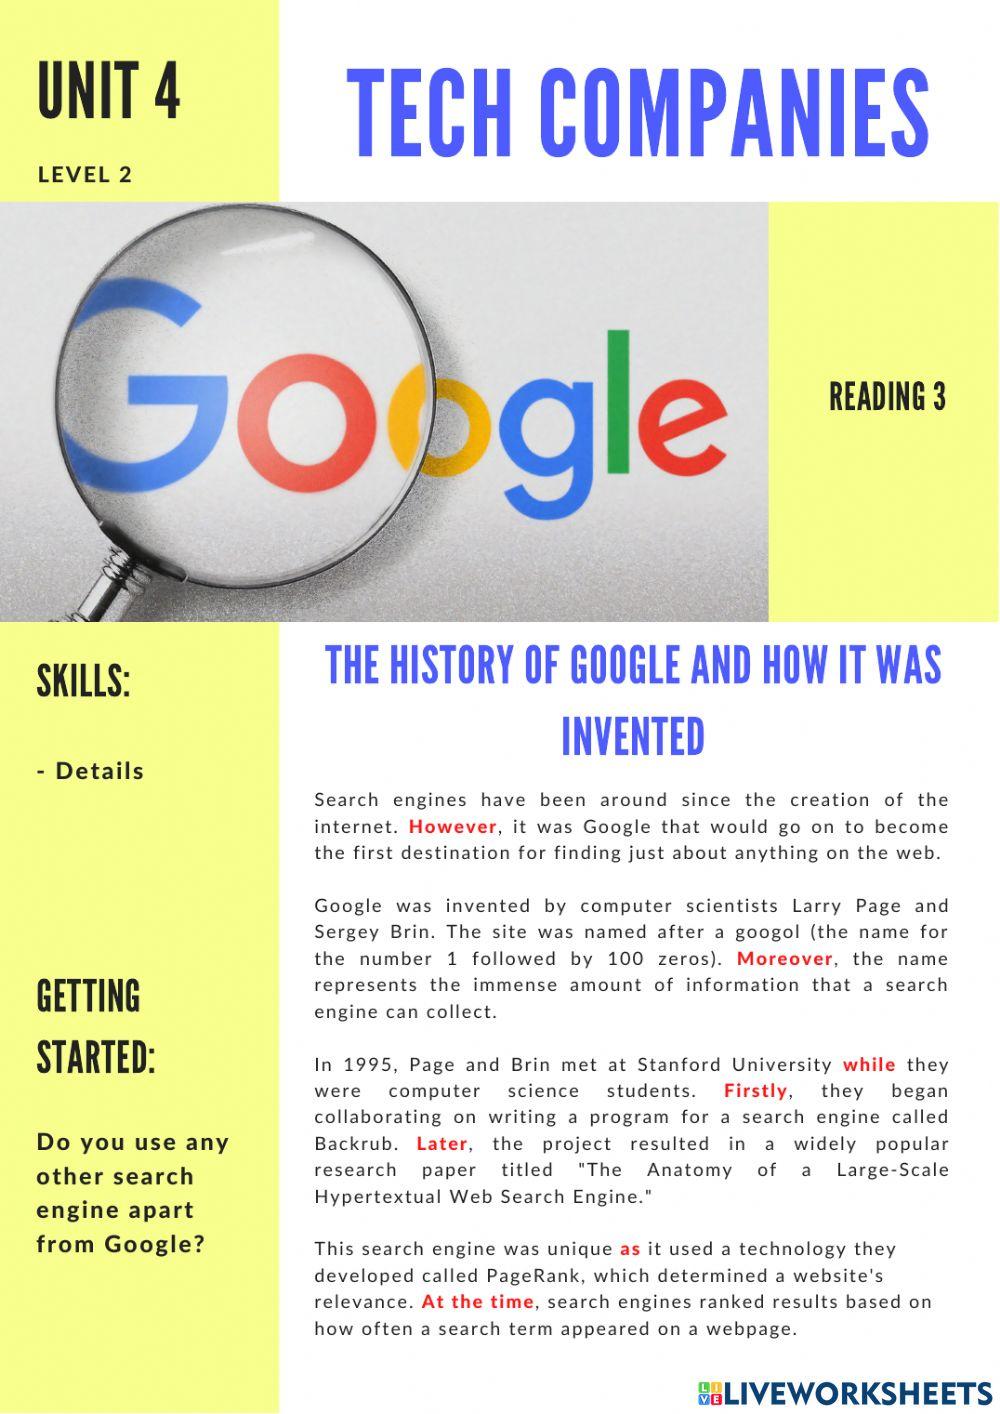 CYCLE 2 - UNIT 4 - READING 2: The history of Google